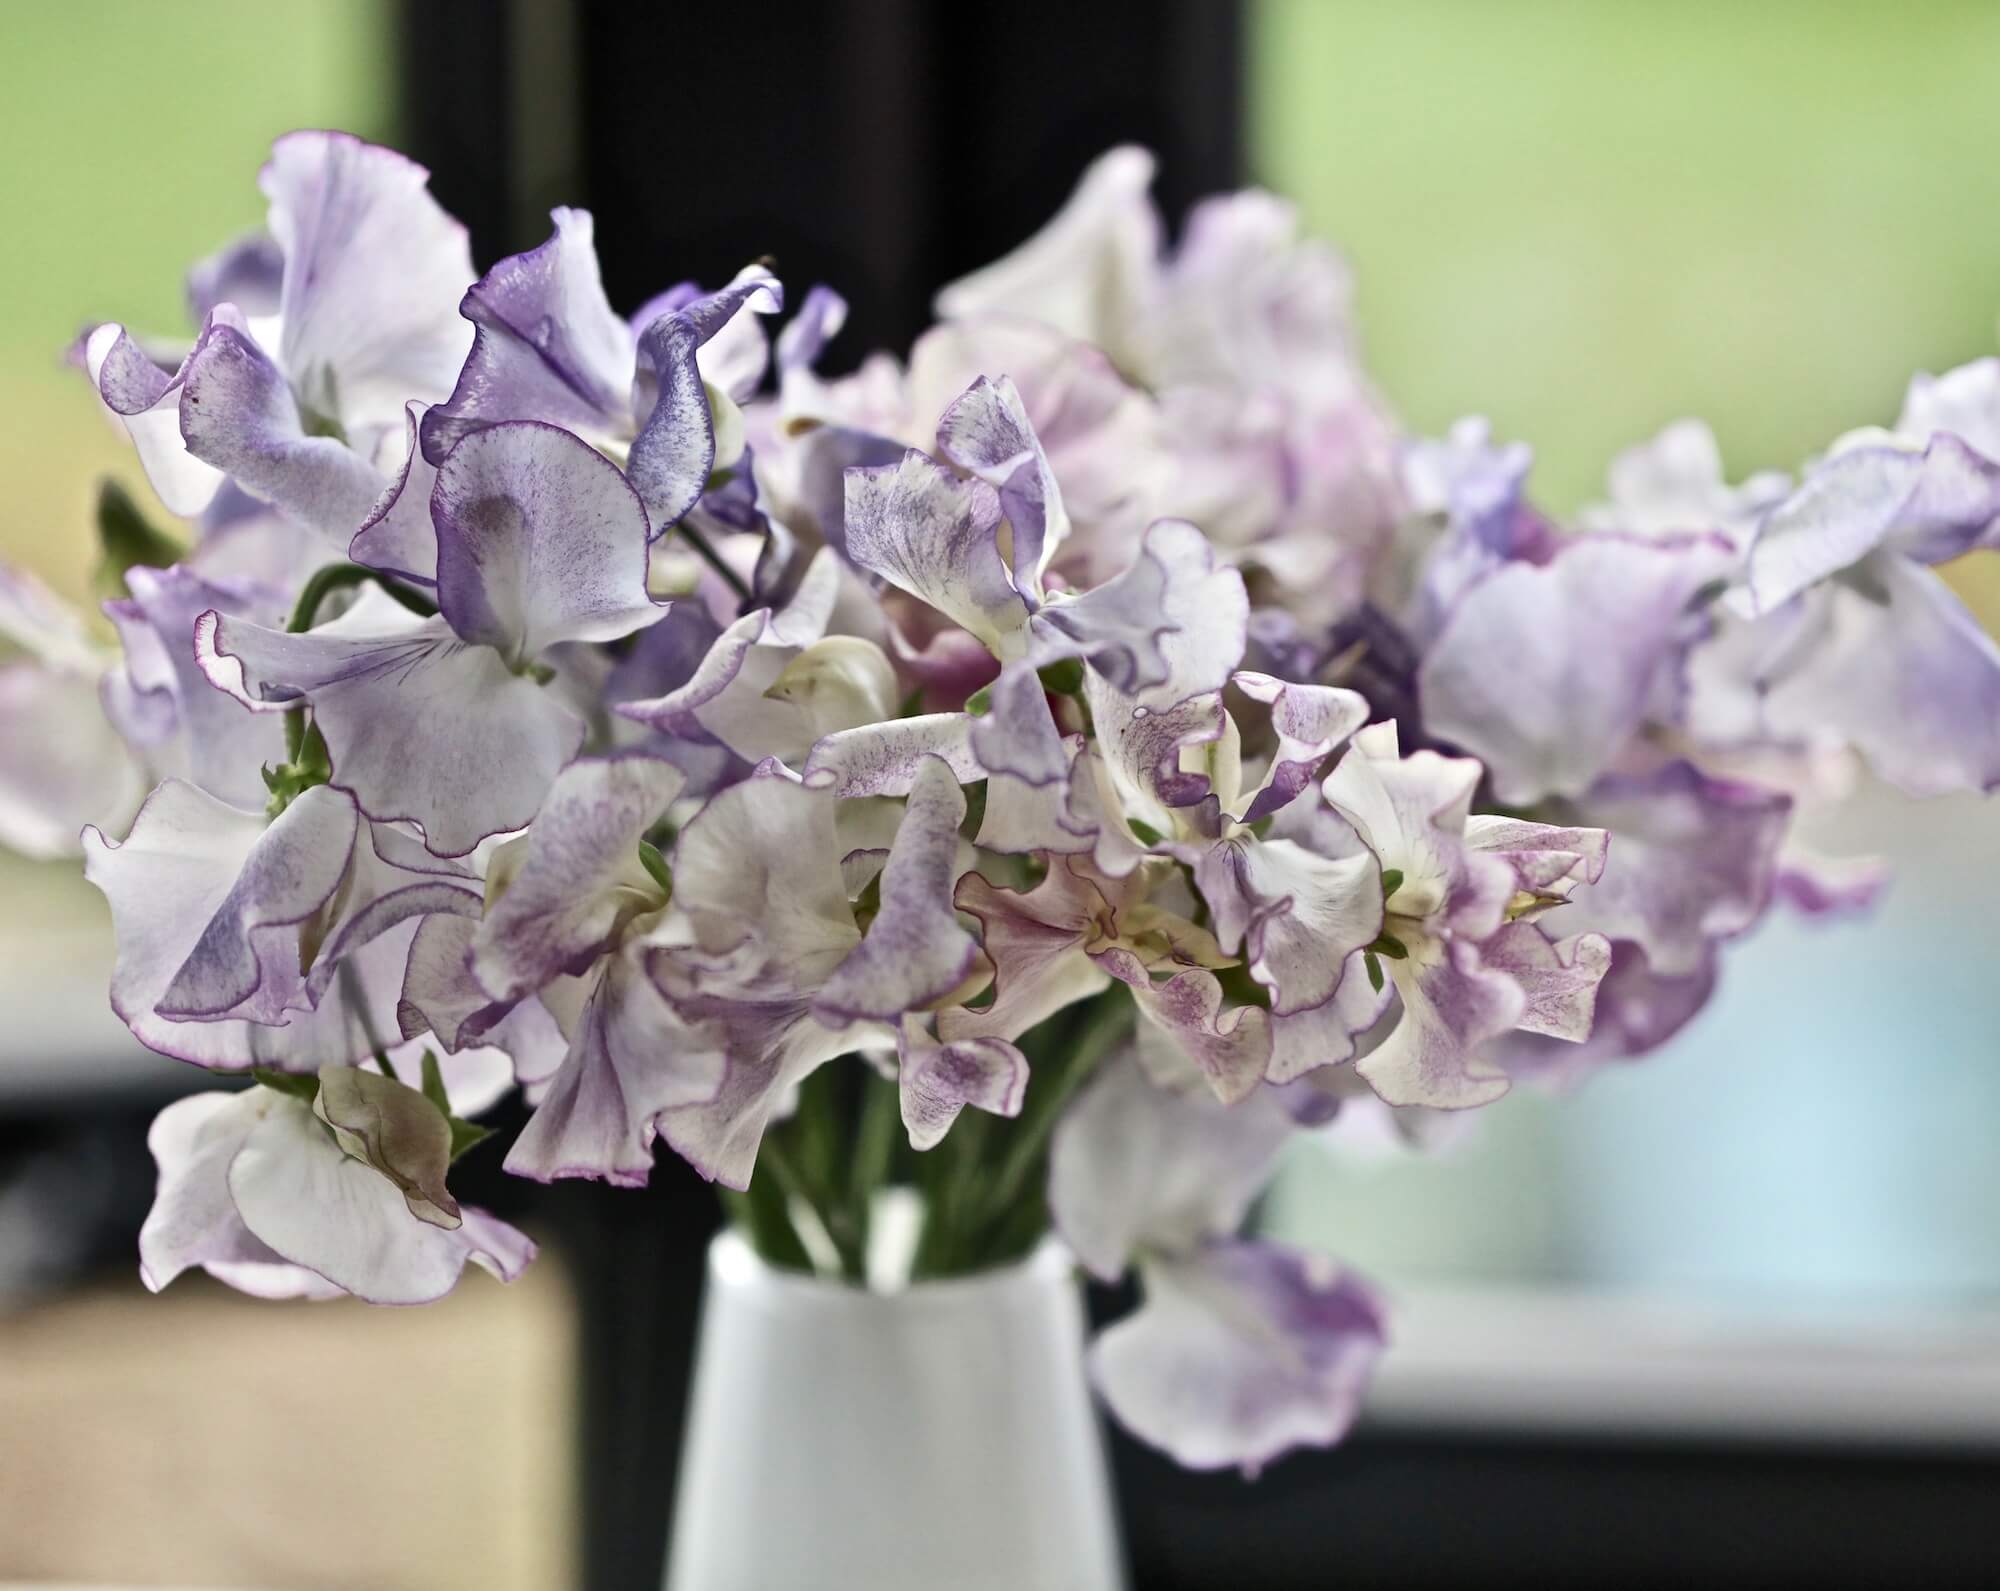 Sweet Peas in a vase in pastel shades from a September garden